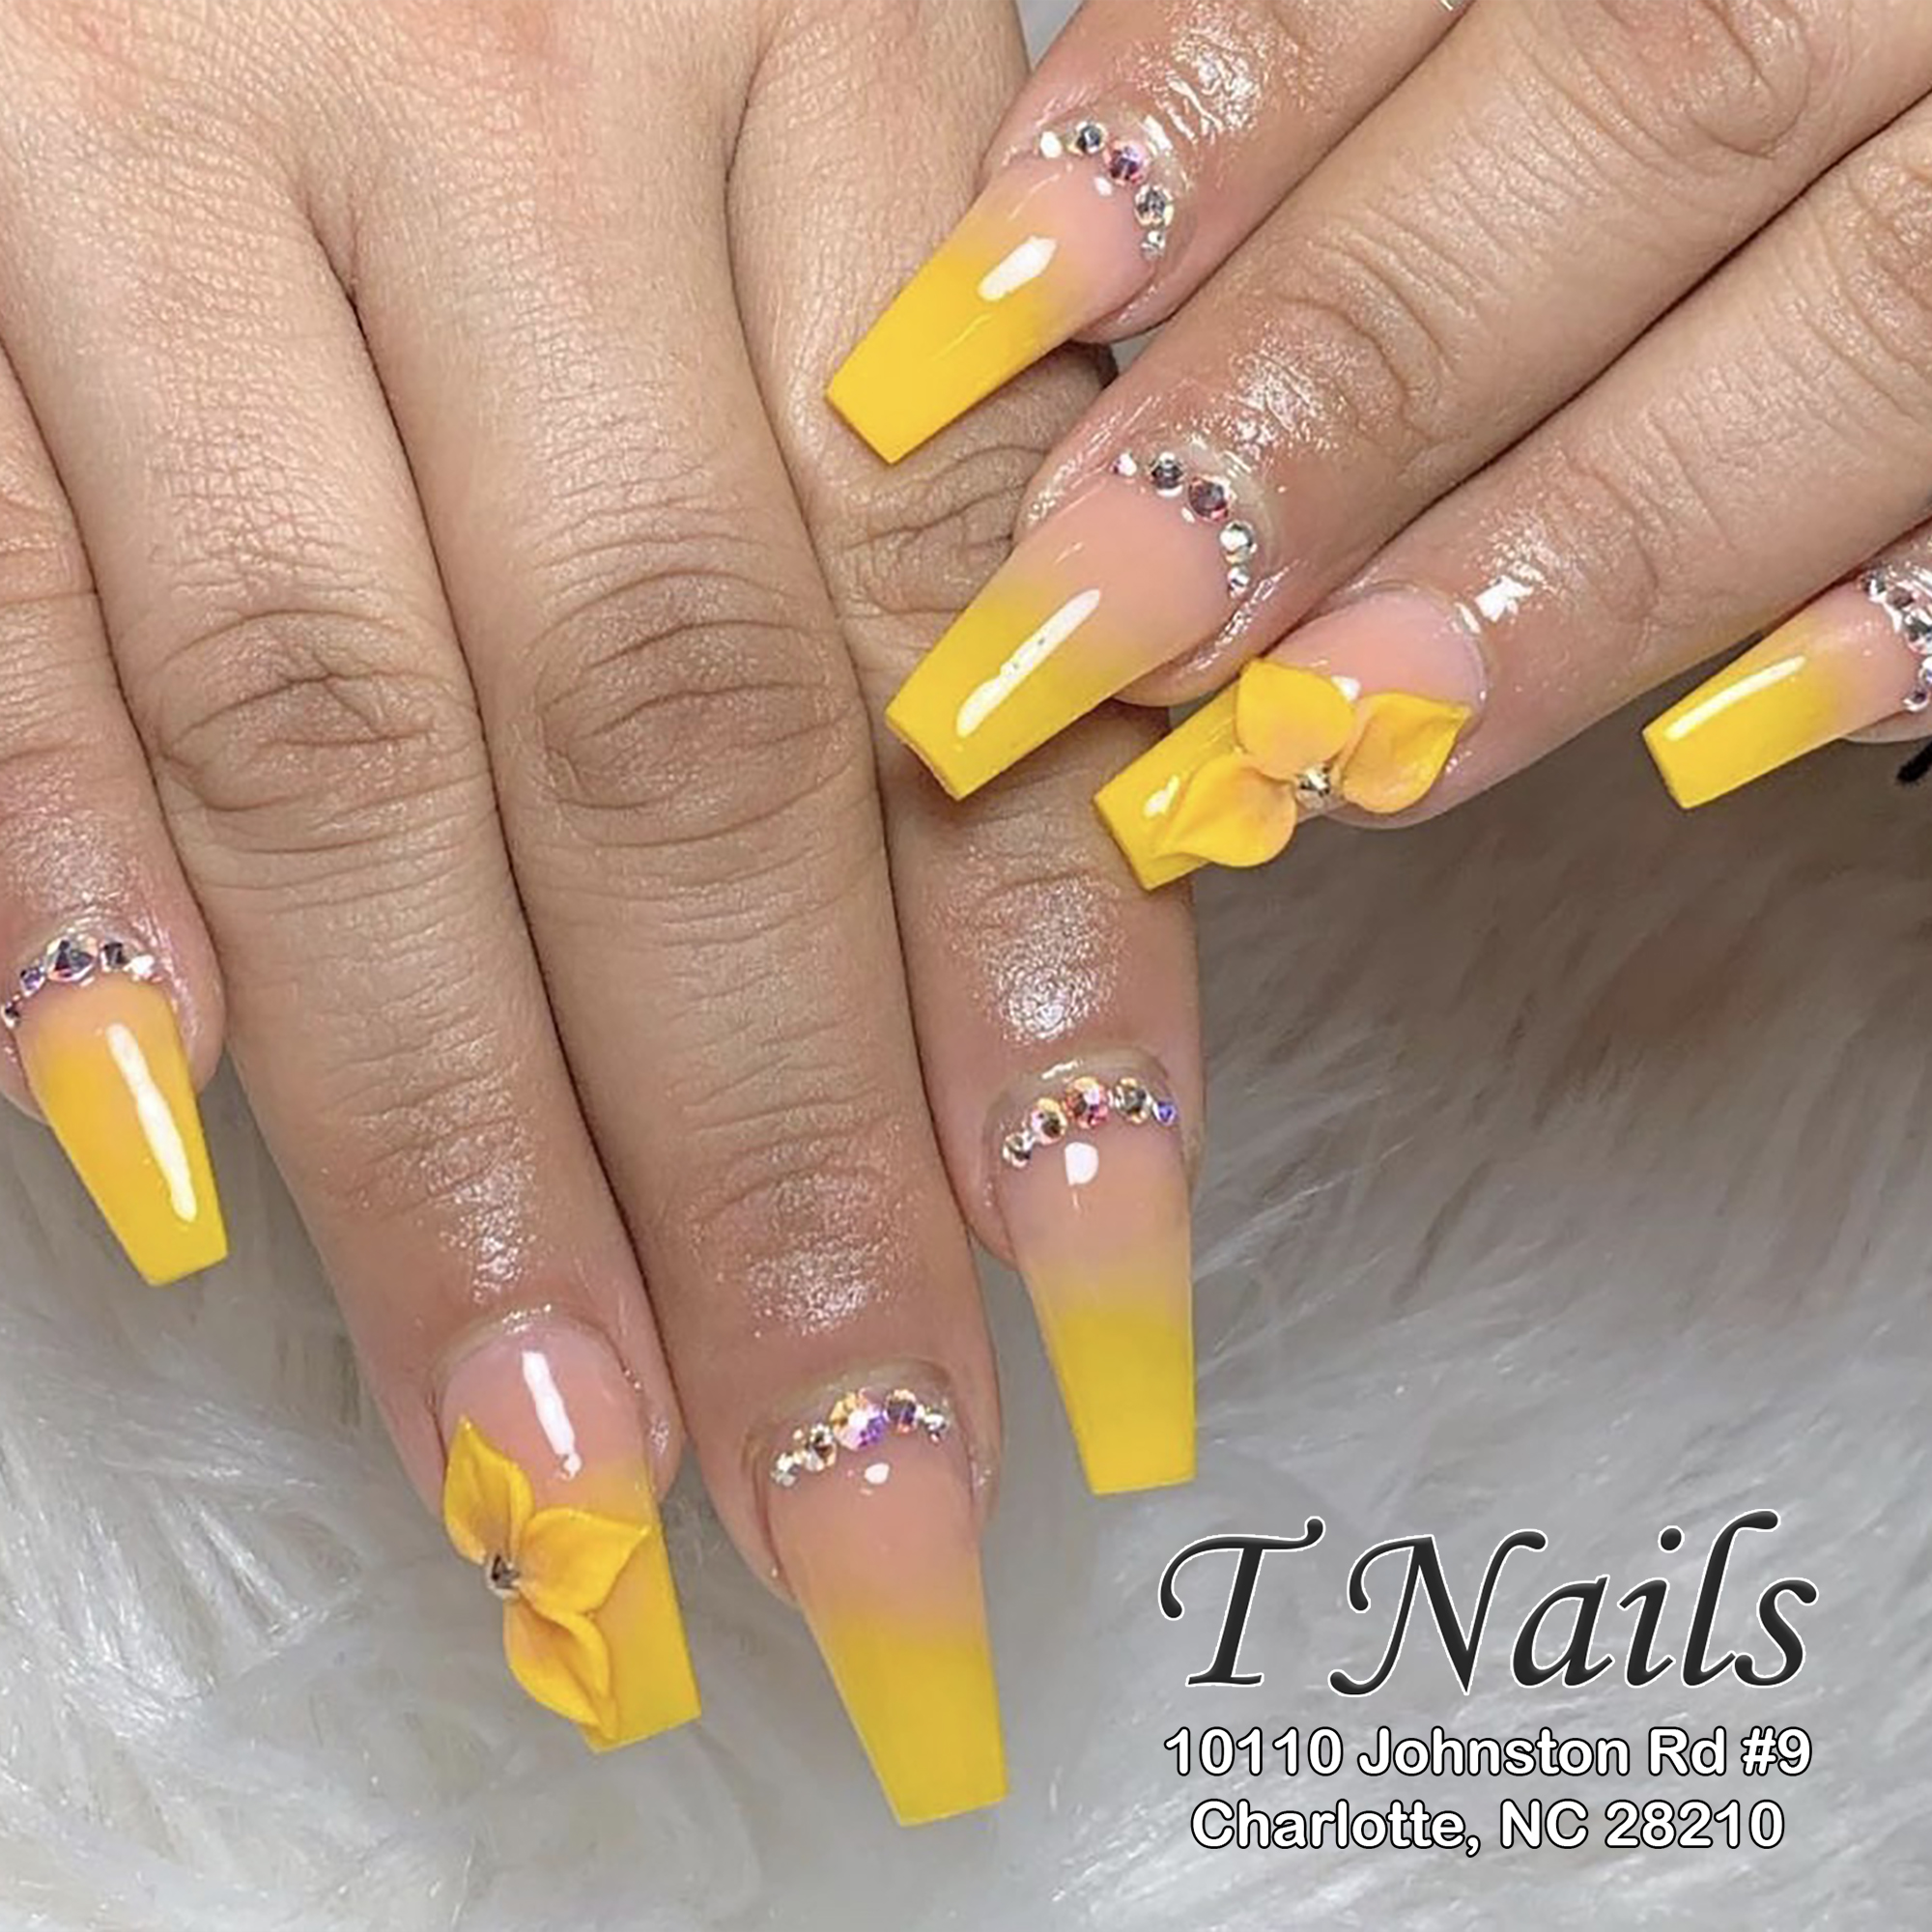 T Nails – The best nail salon in Charlotte, NC 28210